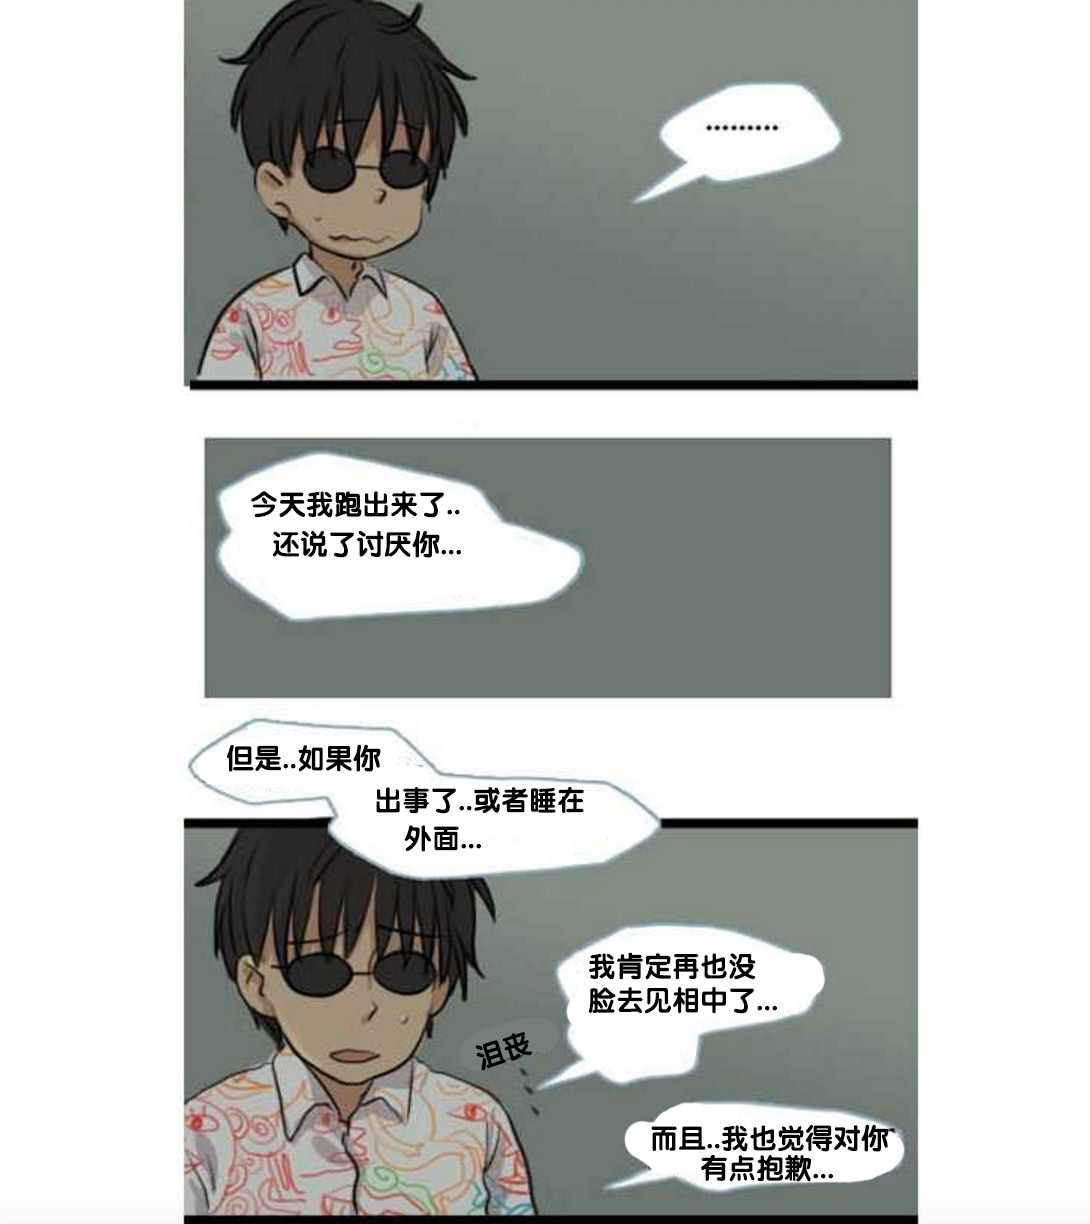 《Welcome to Room 305》漫画 008话